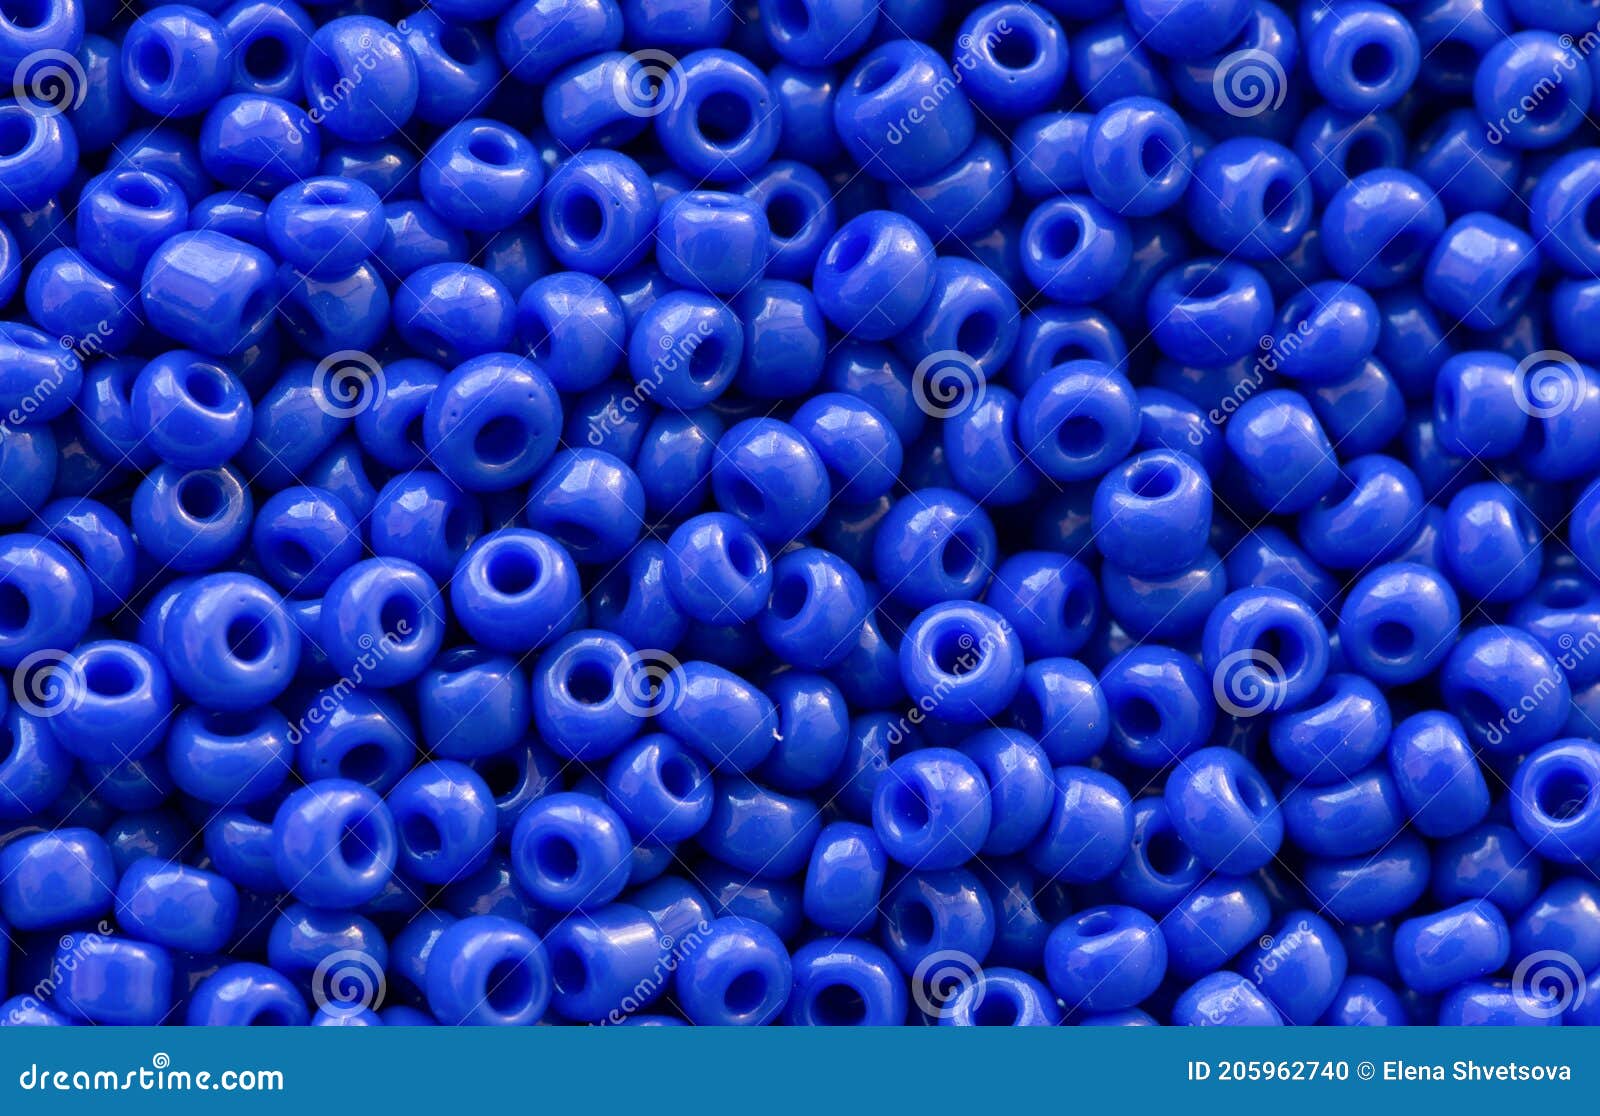 Background Texture of Royal Blue Color Beads Closeup. Seamless Beads  Texture. Hobbies, Handmade Jewelry, Craft. Abstract Stock Photo - Image of  bead, detail: 205962740